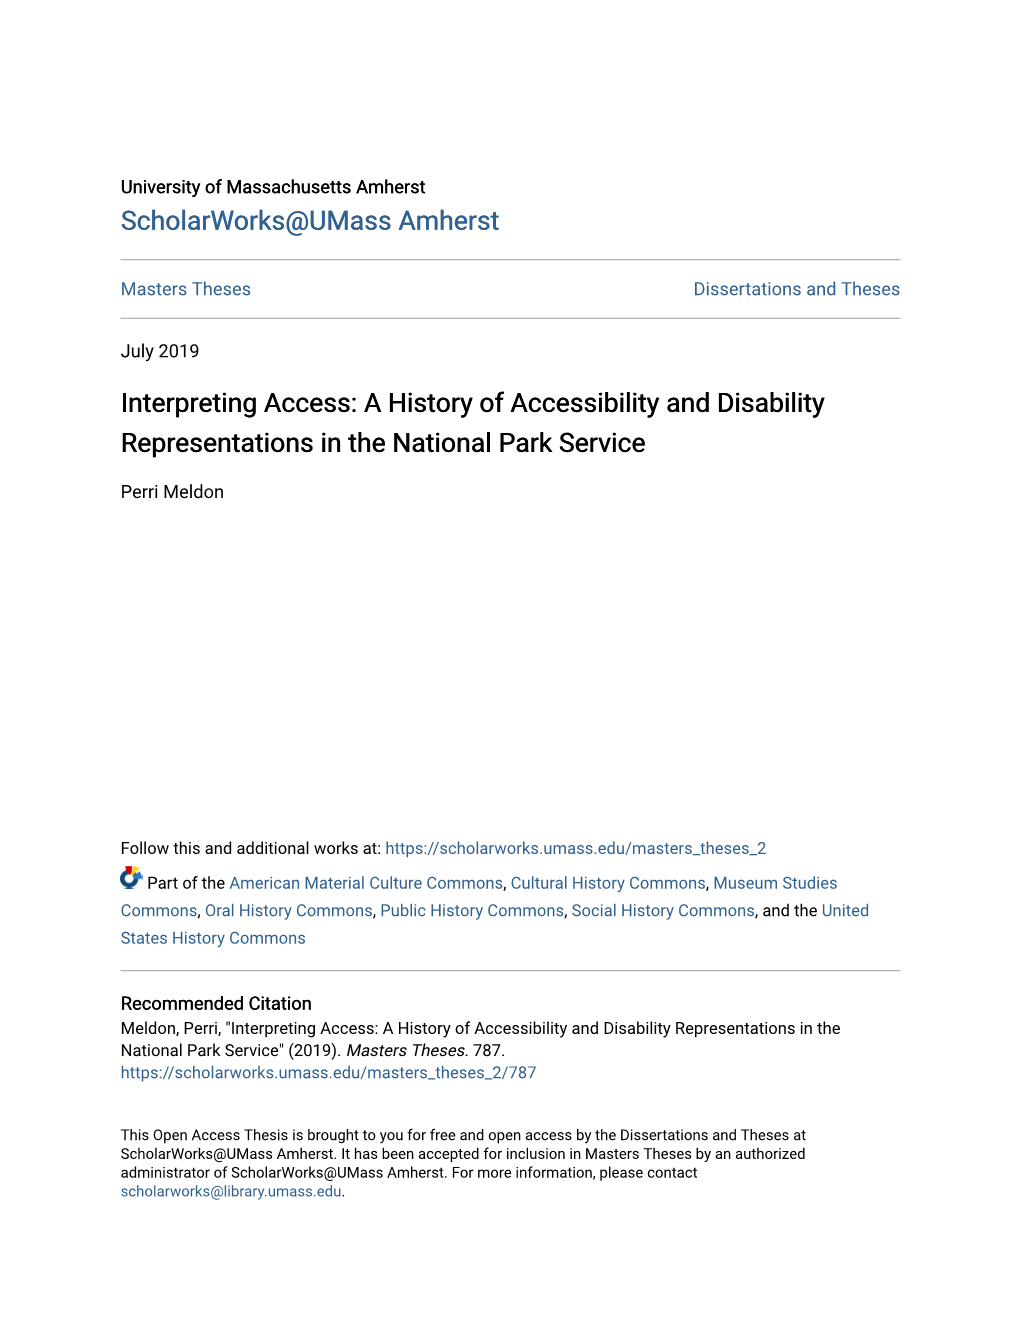 Interpreting Access: a History of Accessibility and Disability Representations in the National Park Service